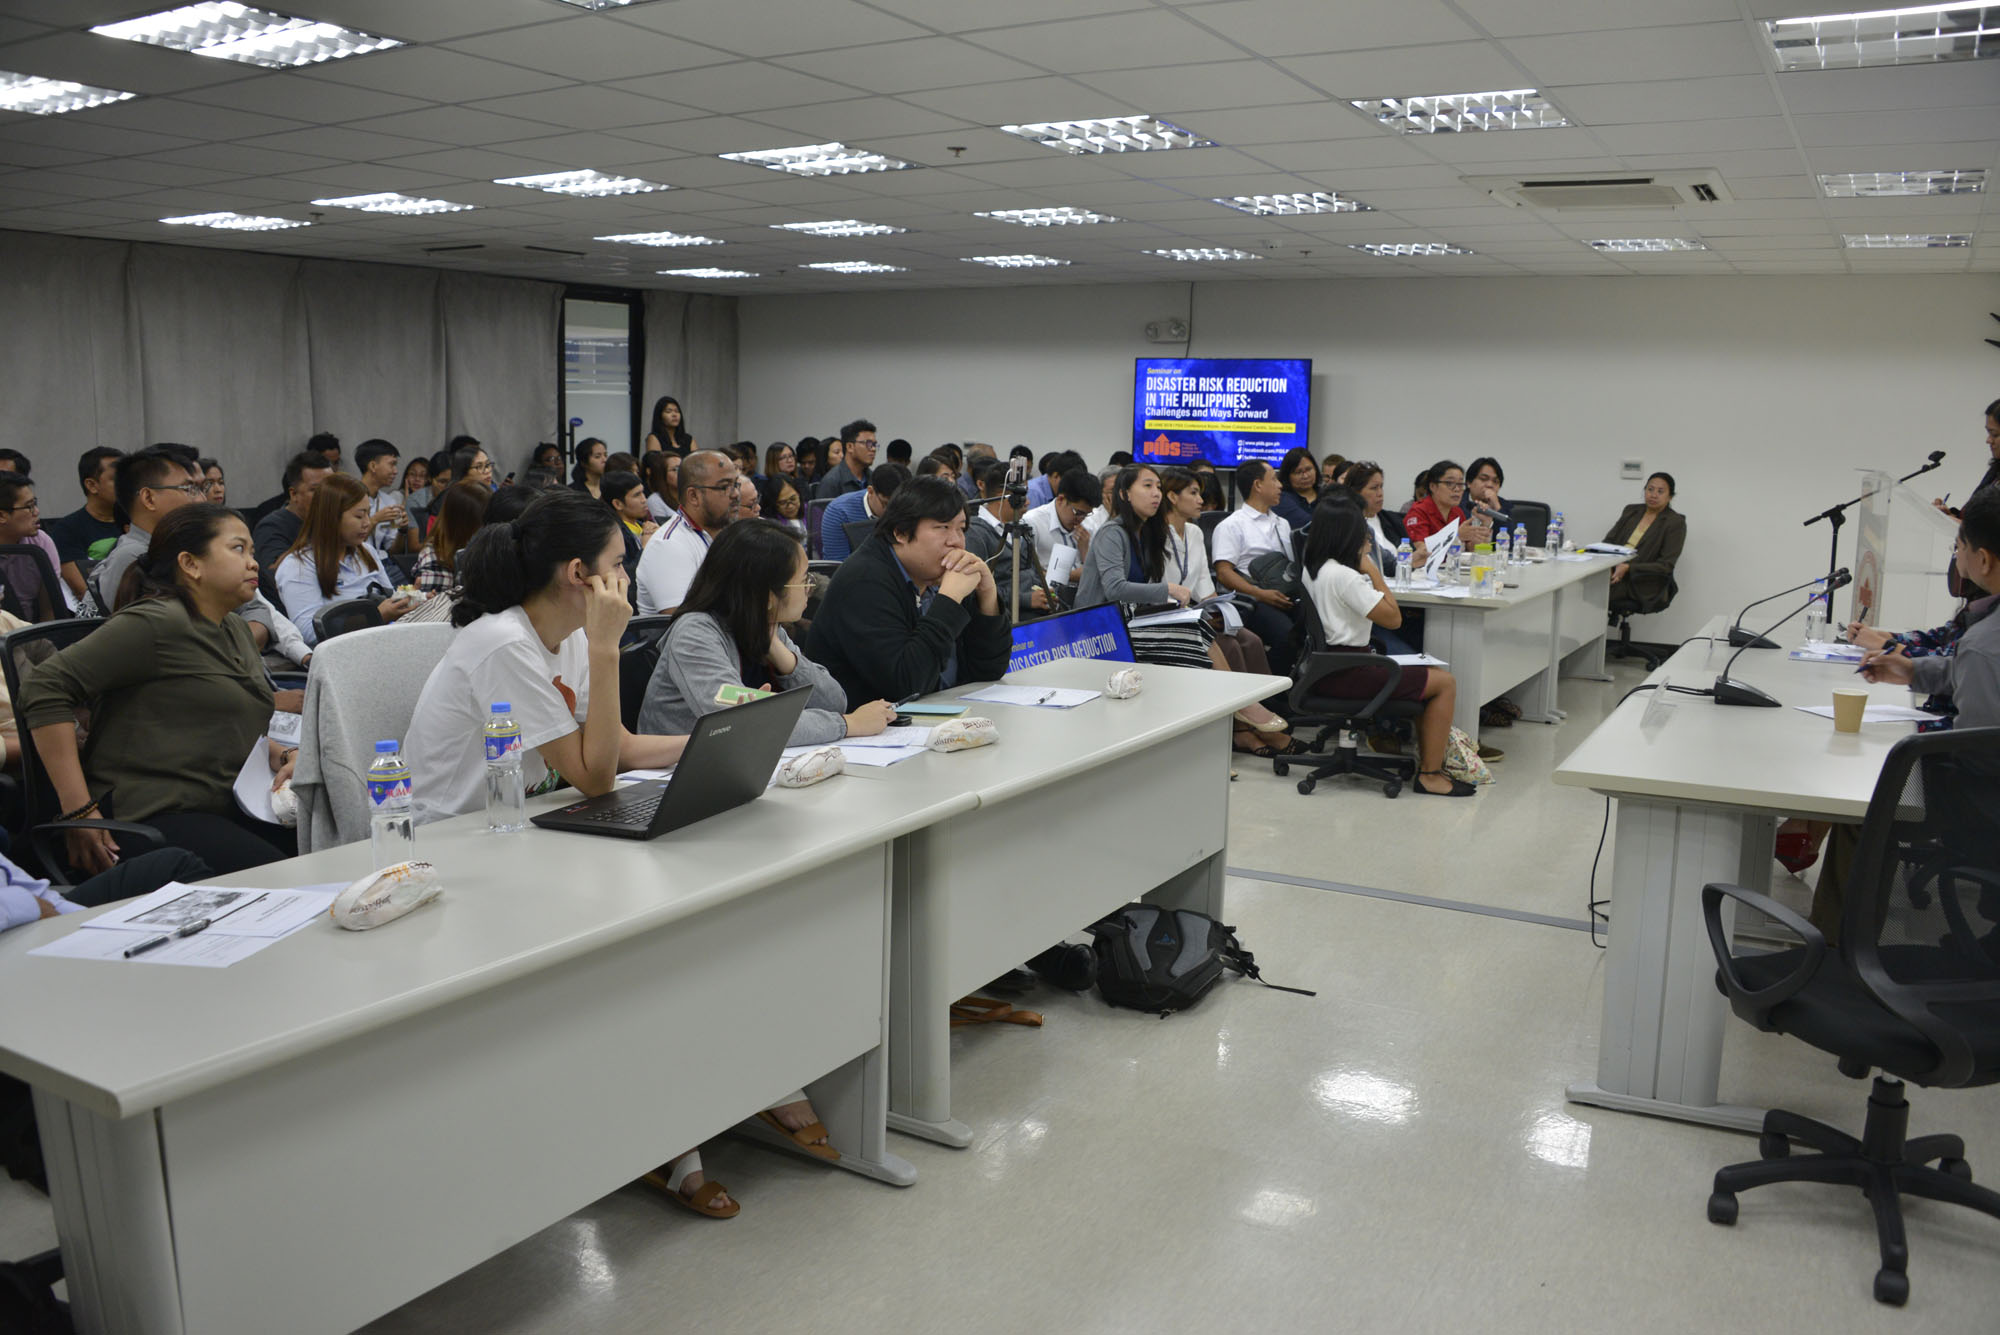 Disaster Risk Reduction in the Philippines: Challenges and Ways Forward-drrm-seminar-19-20180620.jpg